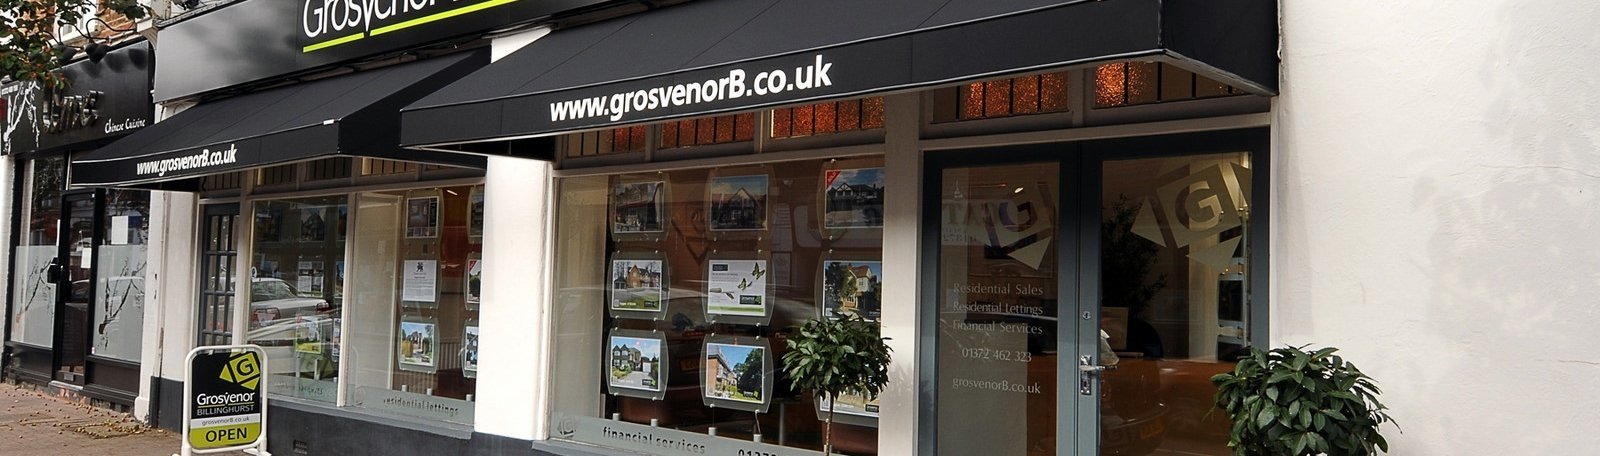 grosvenor’s Claygate office